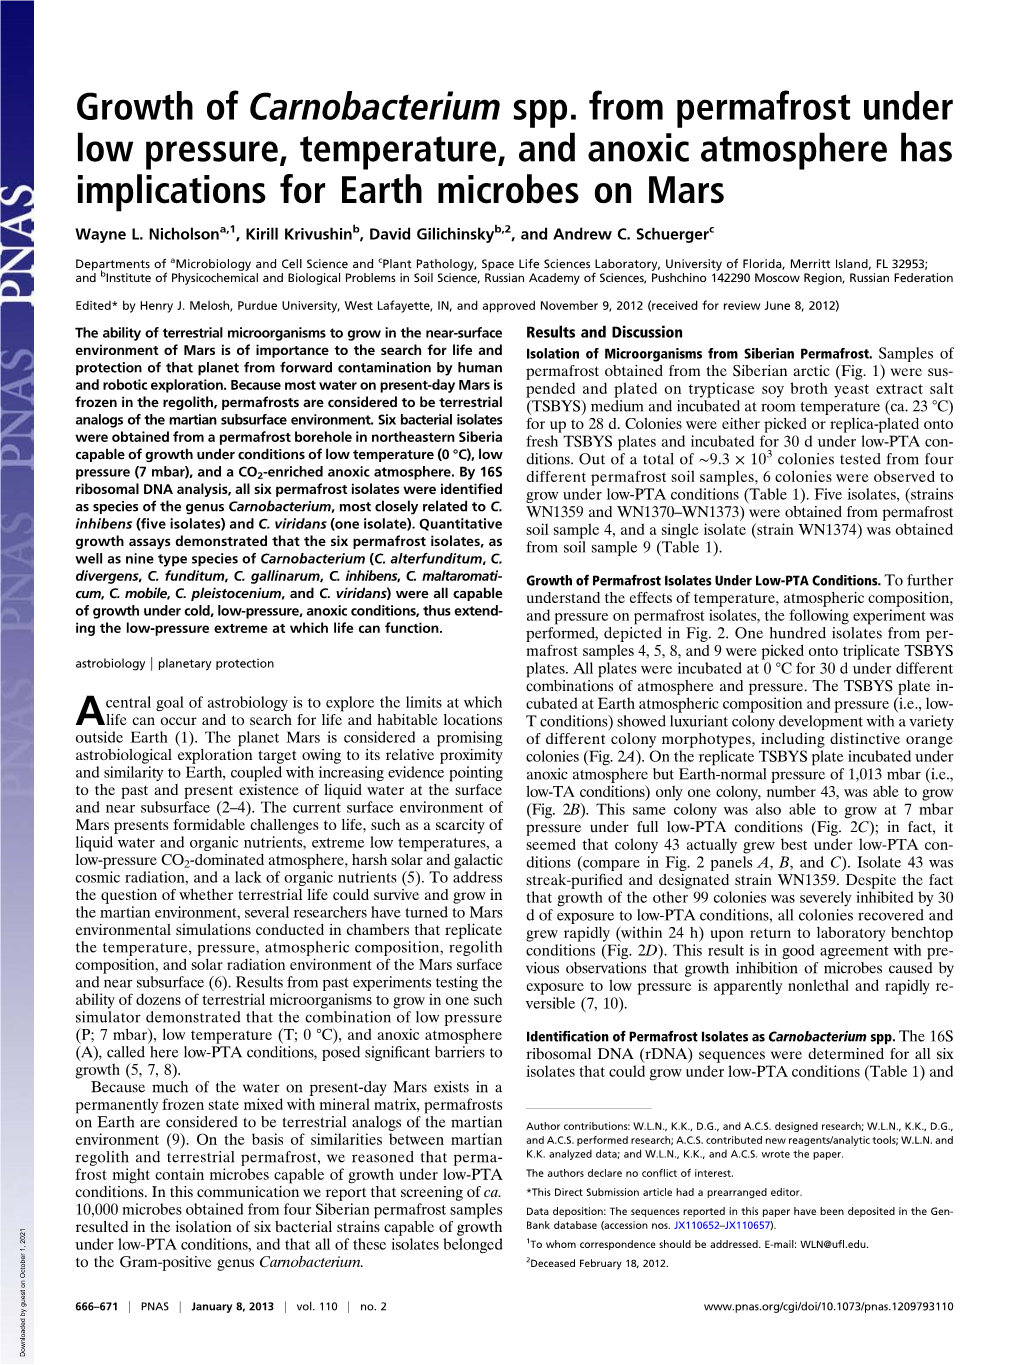 Growth of Carnobacterium Spp. from Permafrost Under Low Pressure, Temperature, and Anoxic Atmosphere Has Implications for Earth Microbes on Mars